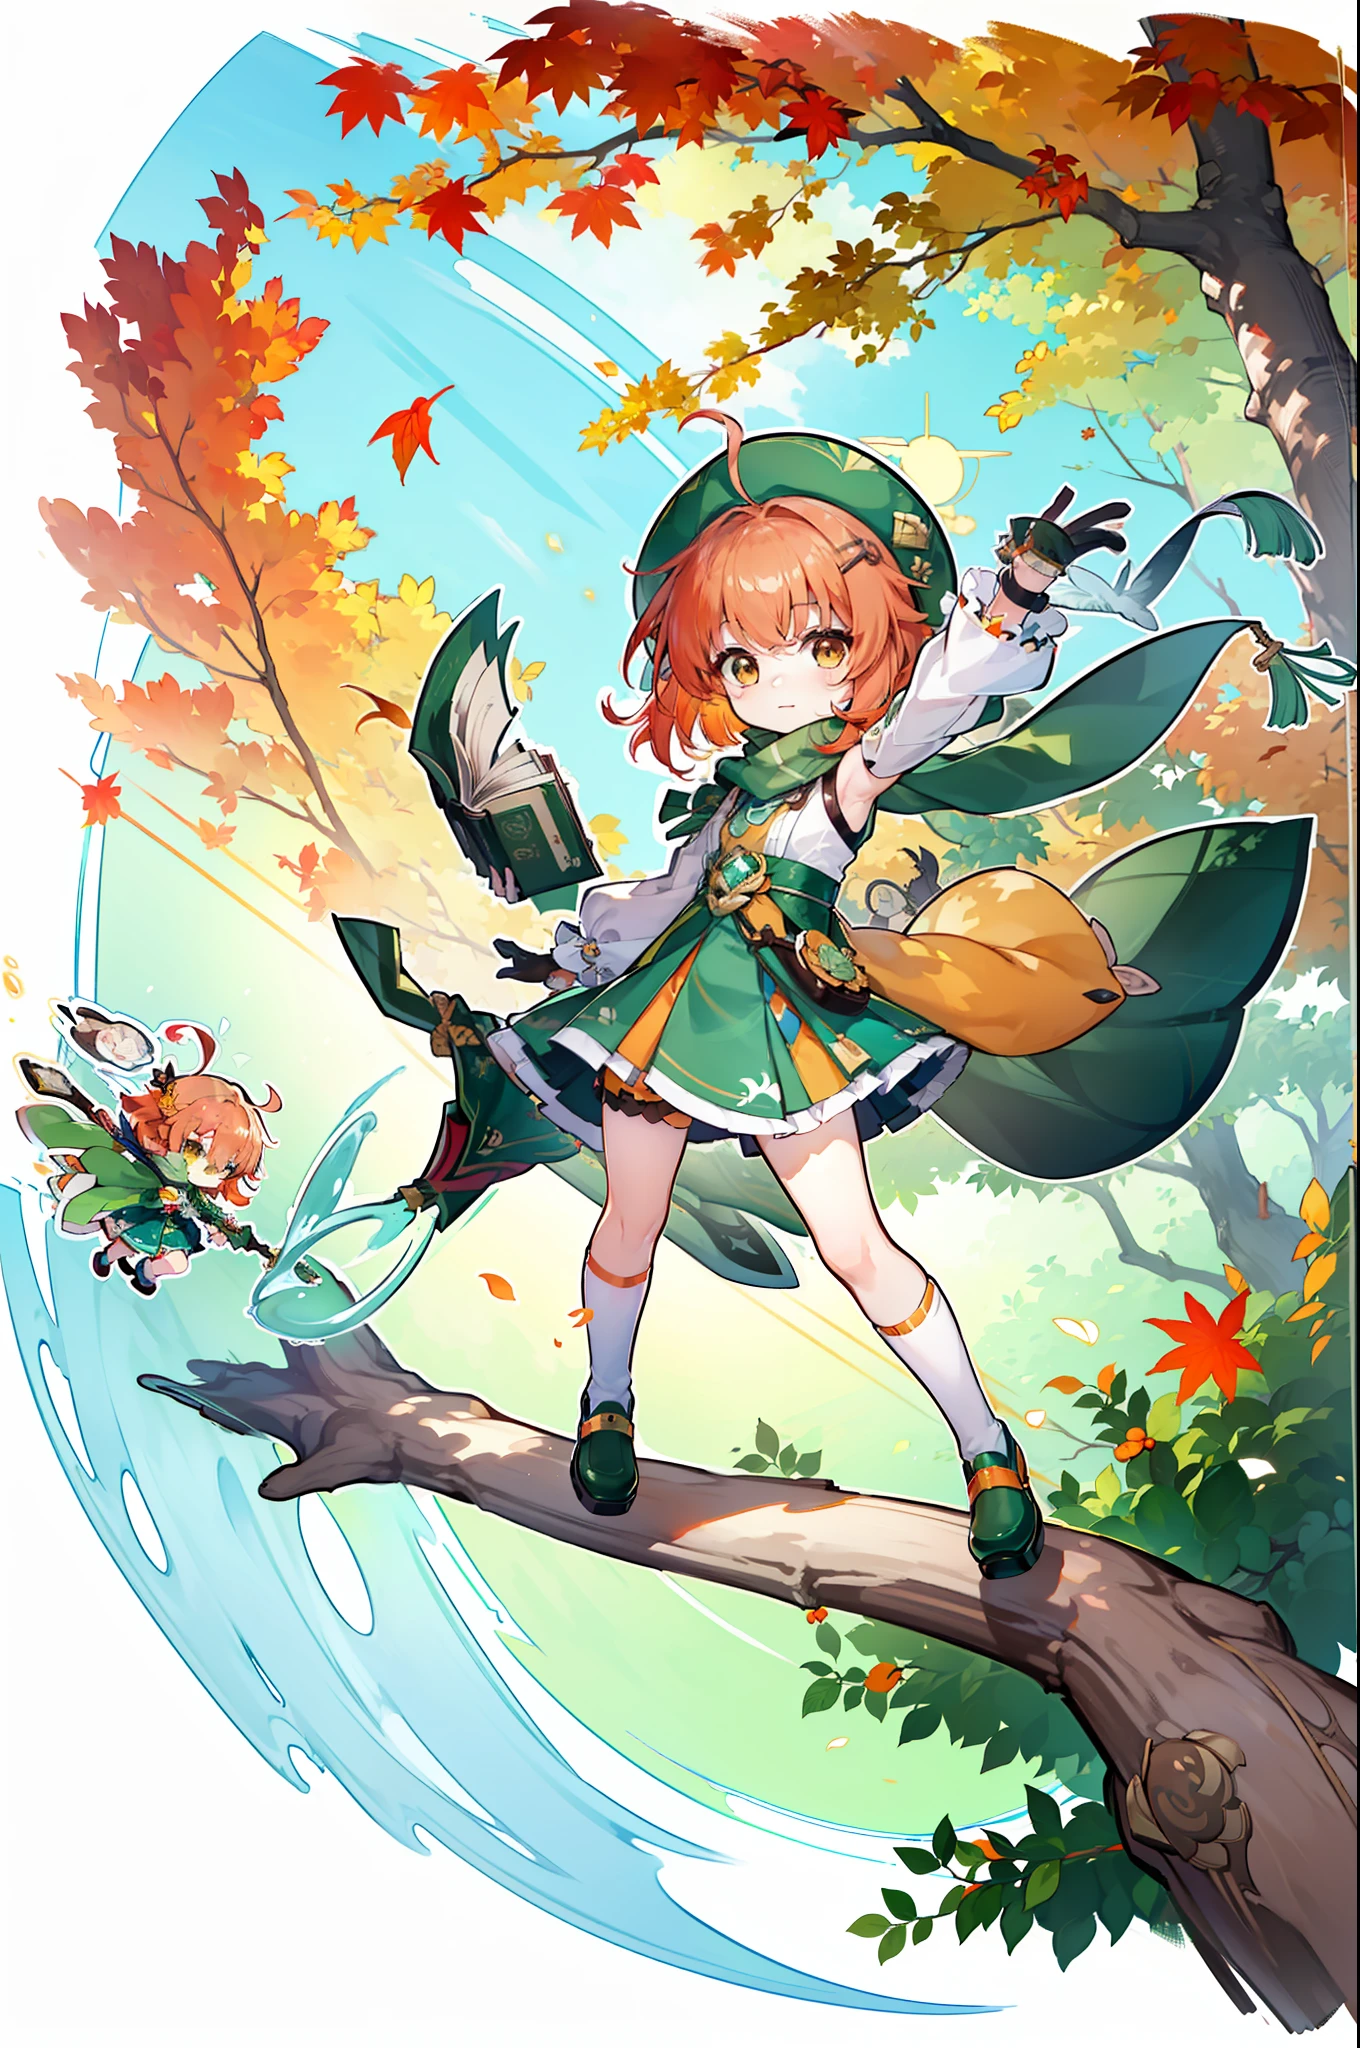 (masterpiece), best quality, expressive eyes, perfect face, ((small, cartoon, anime)), happy, tiny, cute, young girl, short hair, simple design, bangs, ((green hat, brown sling bag, green scarf, gloves, skirt, shoes)) young, ((brown eyes, green reflections, orange highlights)), (unique outfit, patterns, long cape, tree design on skirt, long-sleeved with leaves, cuffs, knee high socks, shirt asymmetry, orange hair, hair pin, flying book), fullbody, full body, splash screen, (swirling background, dynamic scene, autumn, ahoge) 18th century clothing, genshin impact, green ivy cap, green hat, sling bag, ((young girl, , young lady, , chibi, small, tiny, cute))